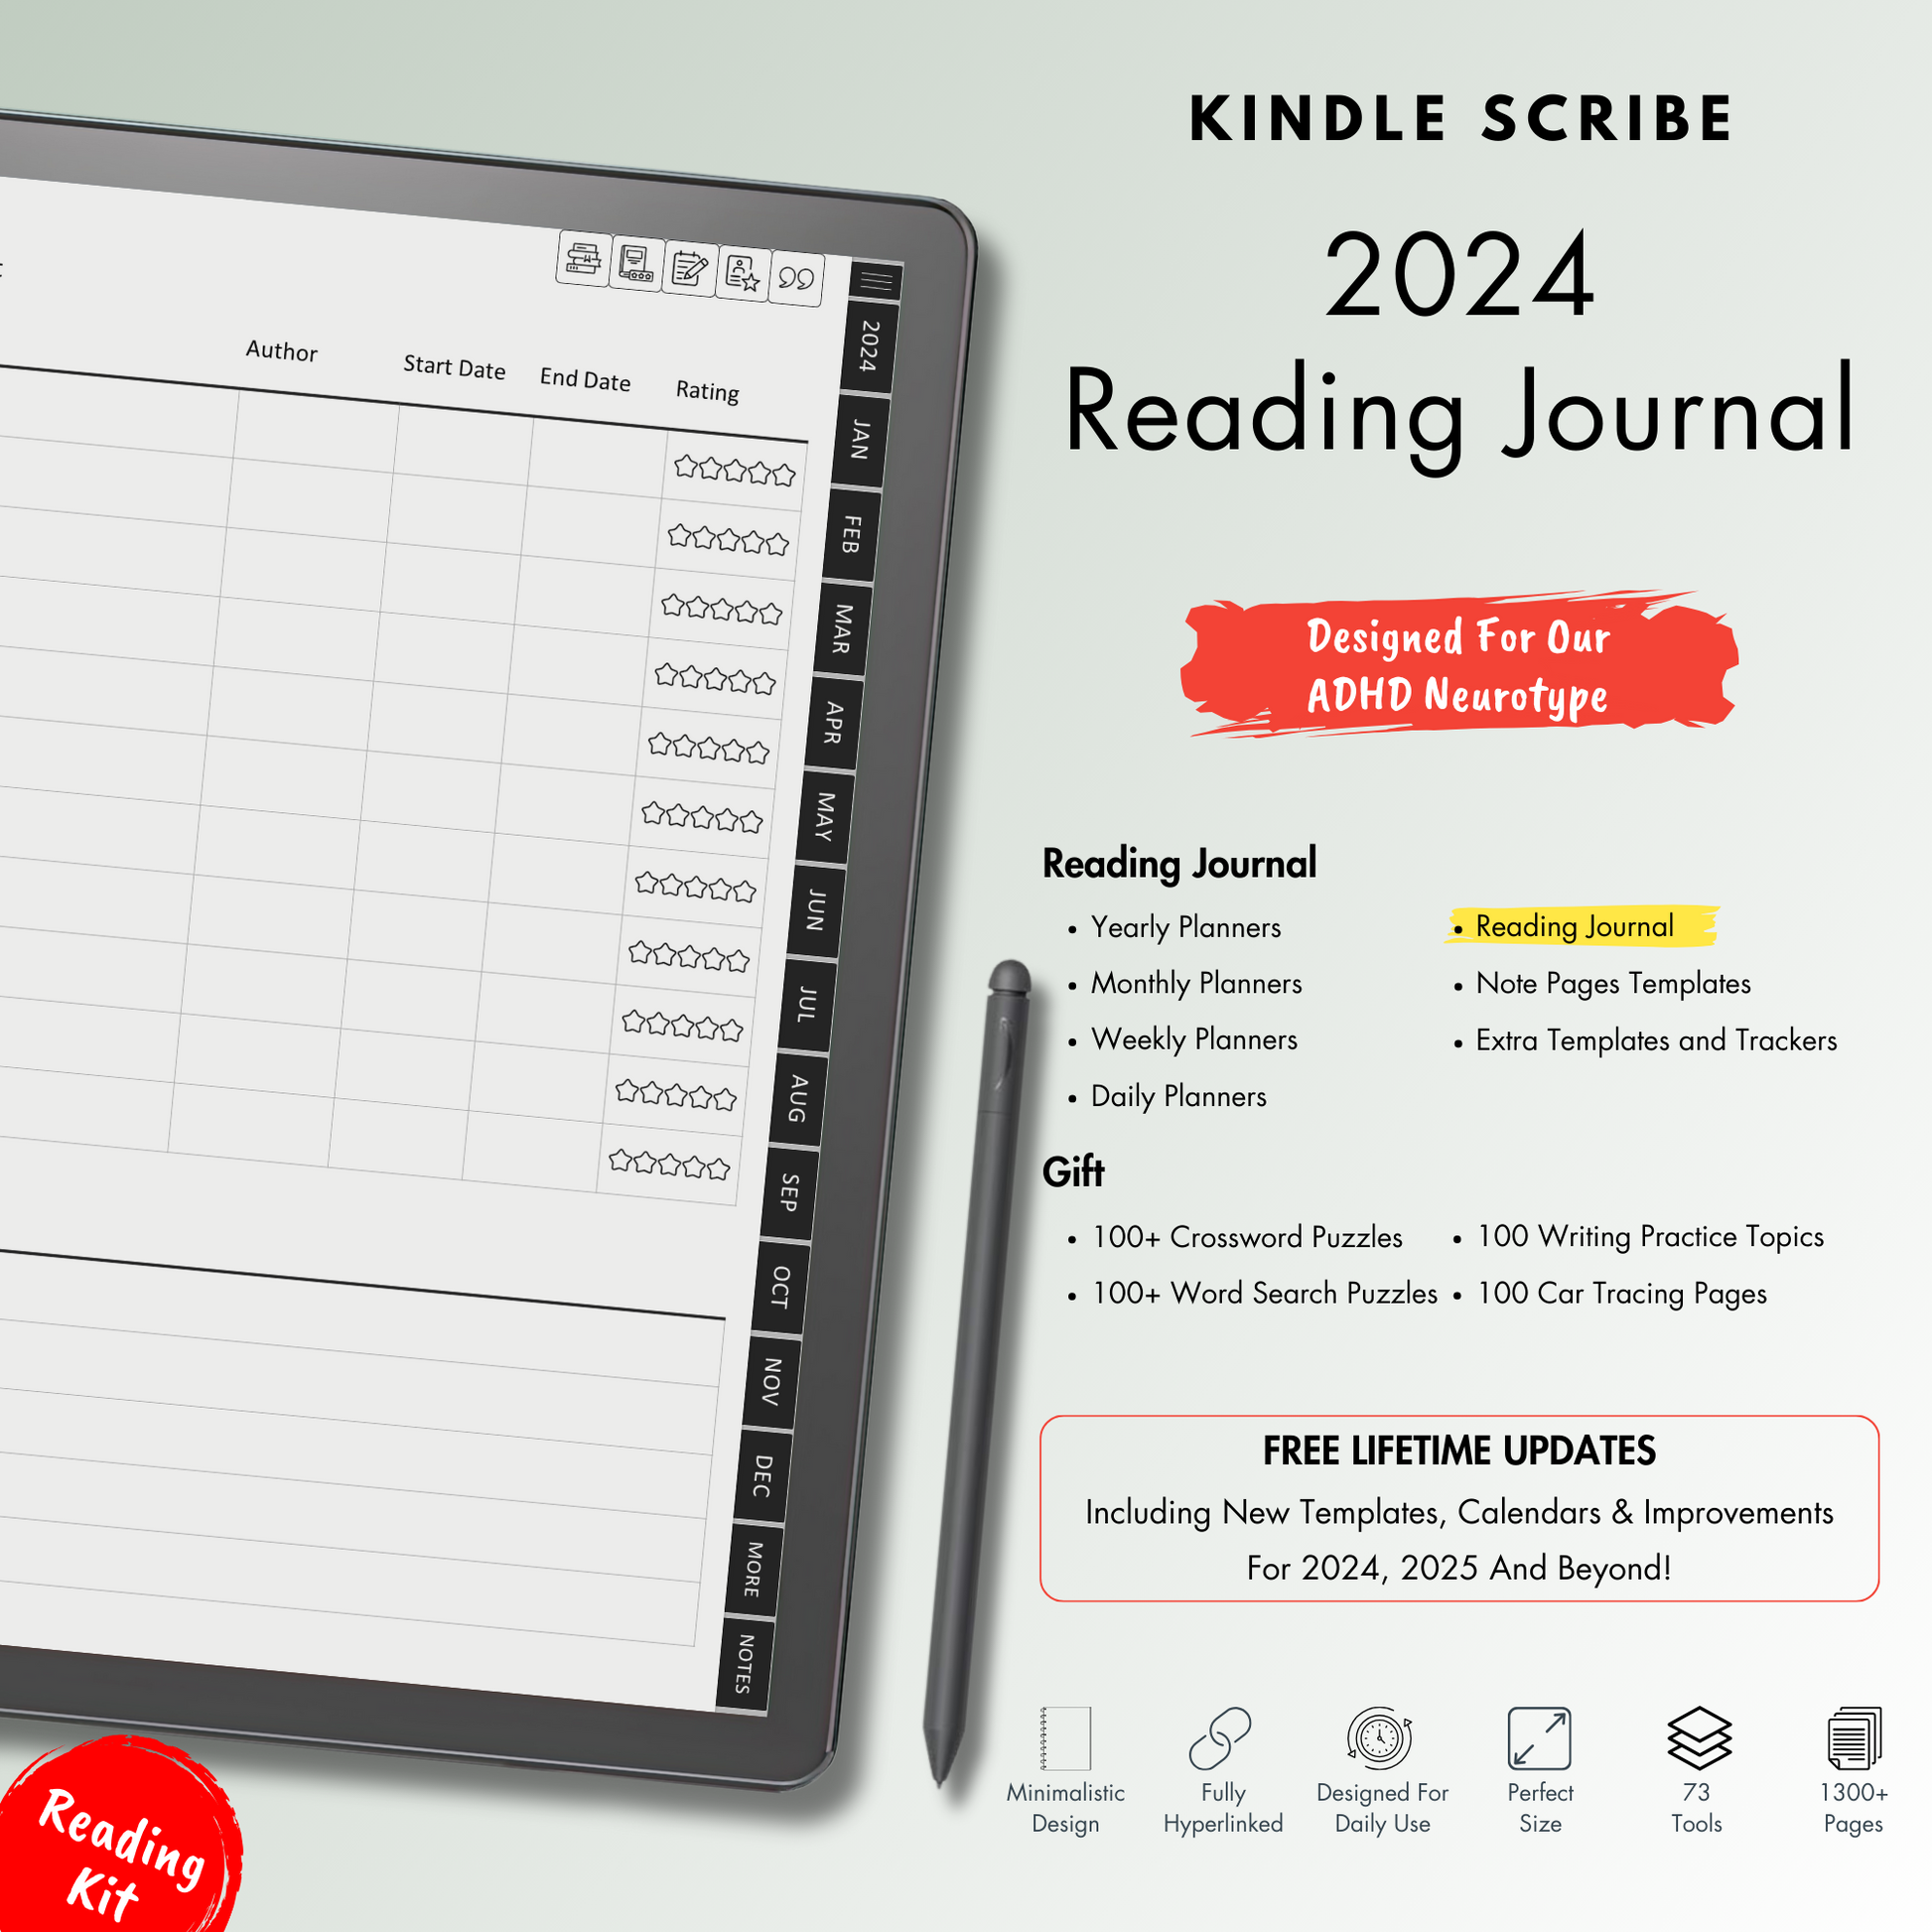 Reading Journal 2024 for Kindle Scribe.